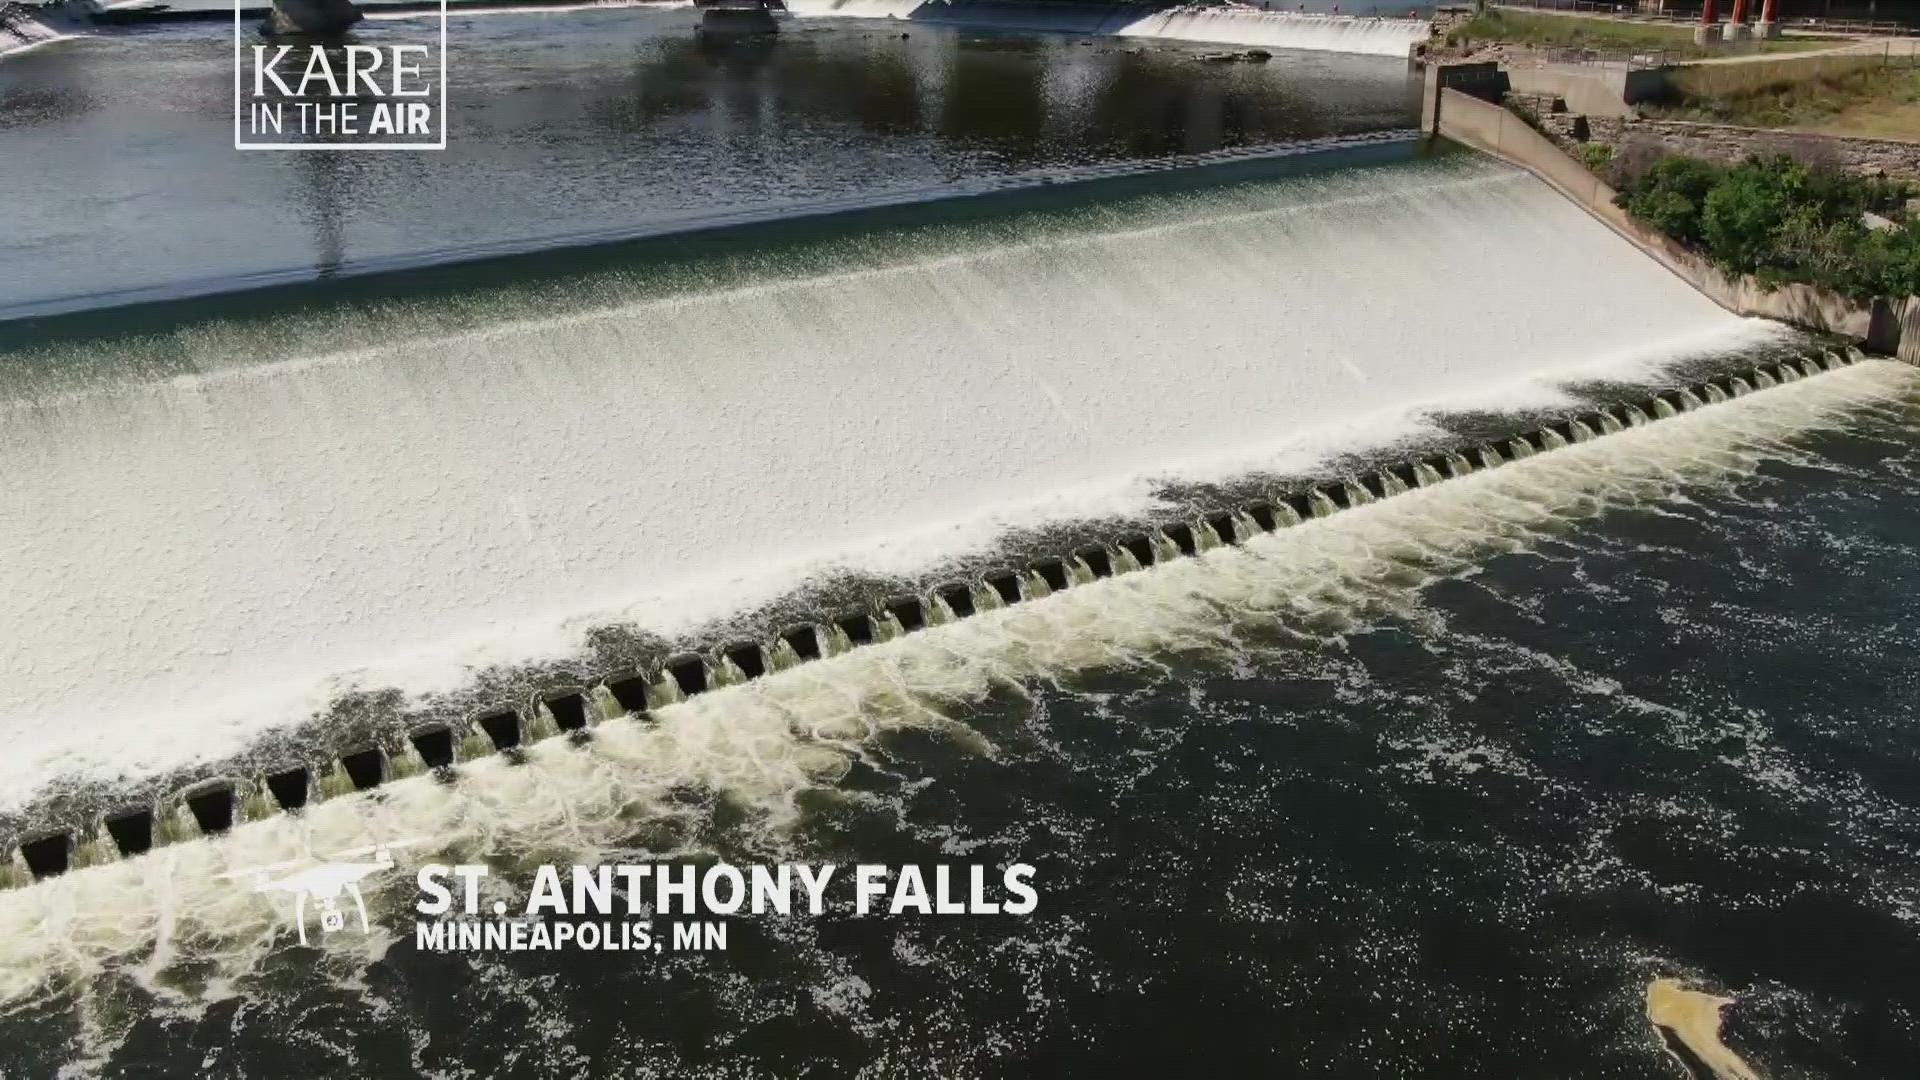 Our KARE in the Air summer series takes us over St. Anthony Falls, what some call the only 'true' waterfall on the entire Mississippi river.